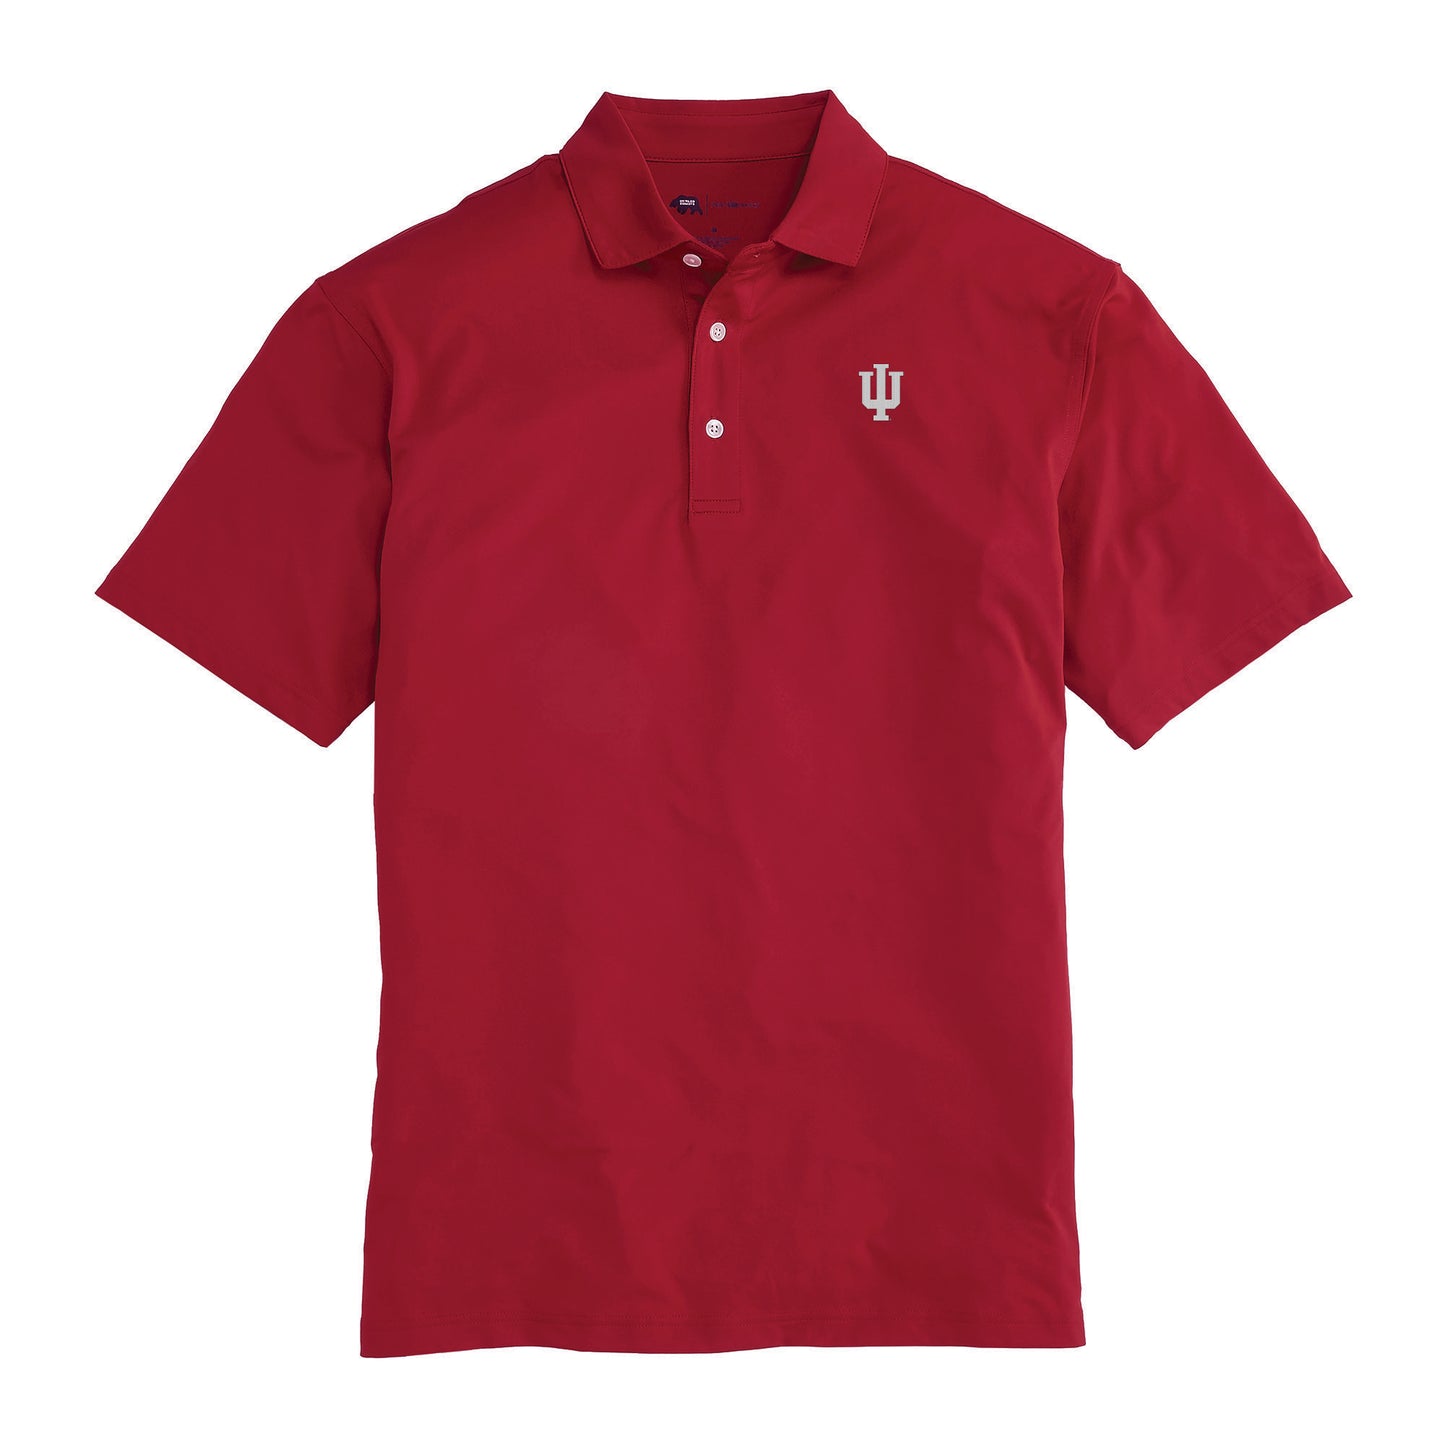 Solid Indiana Performance Polo